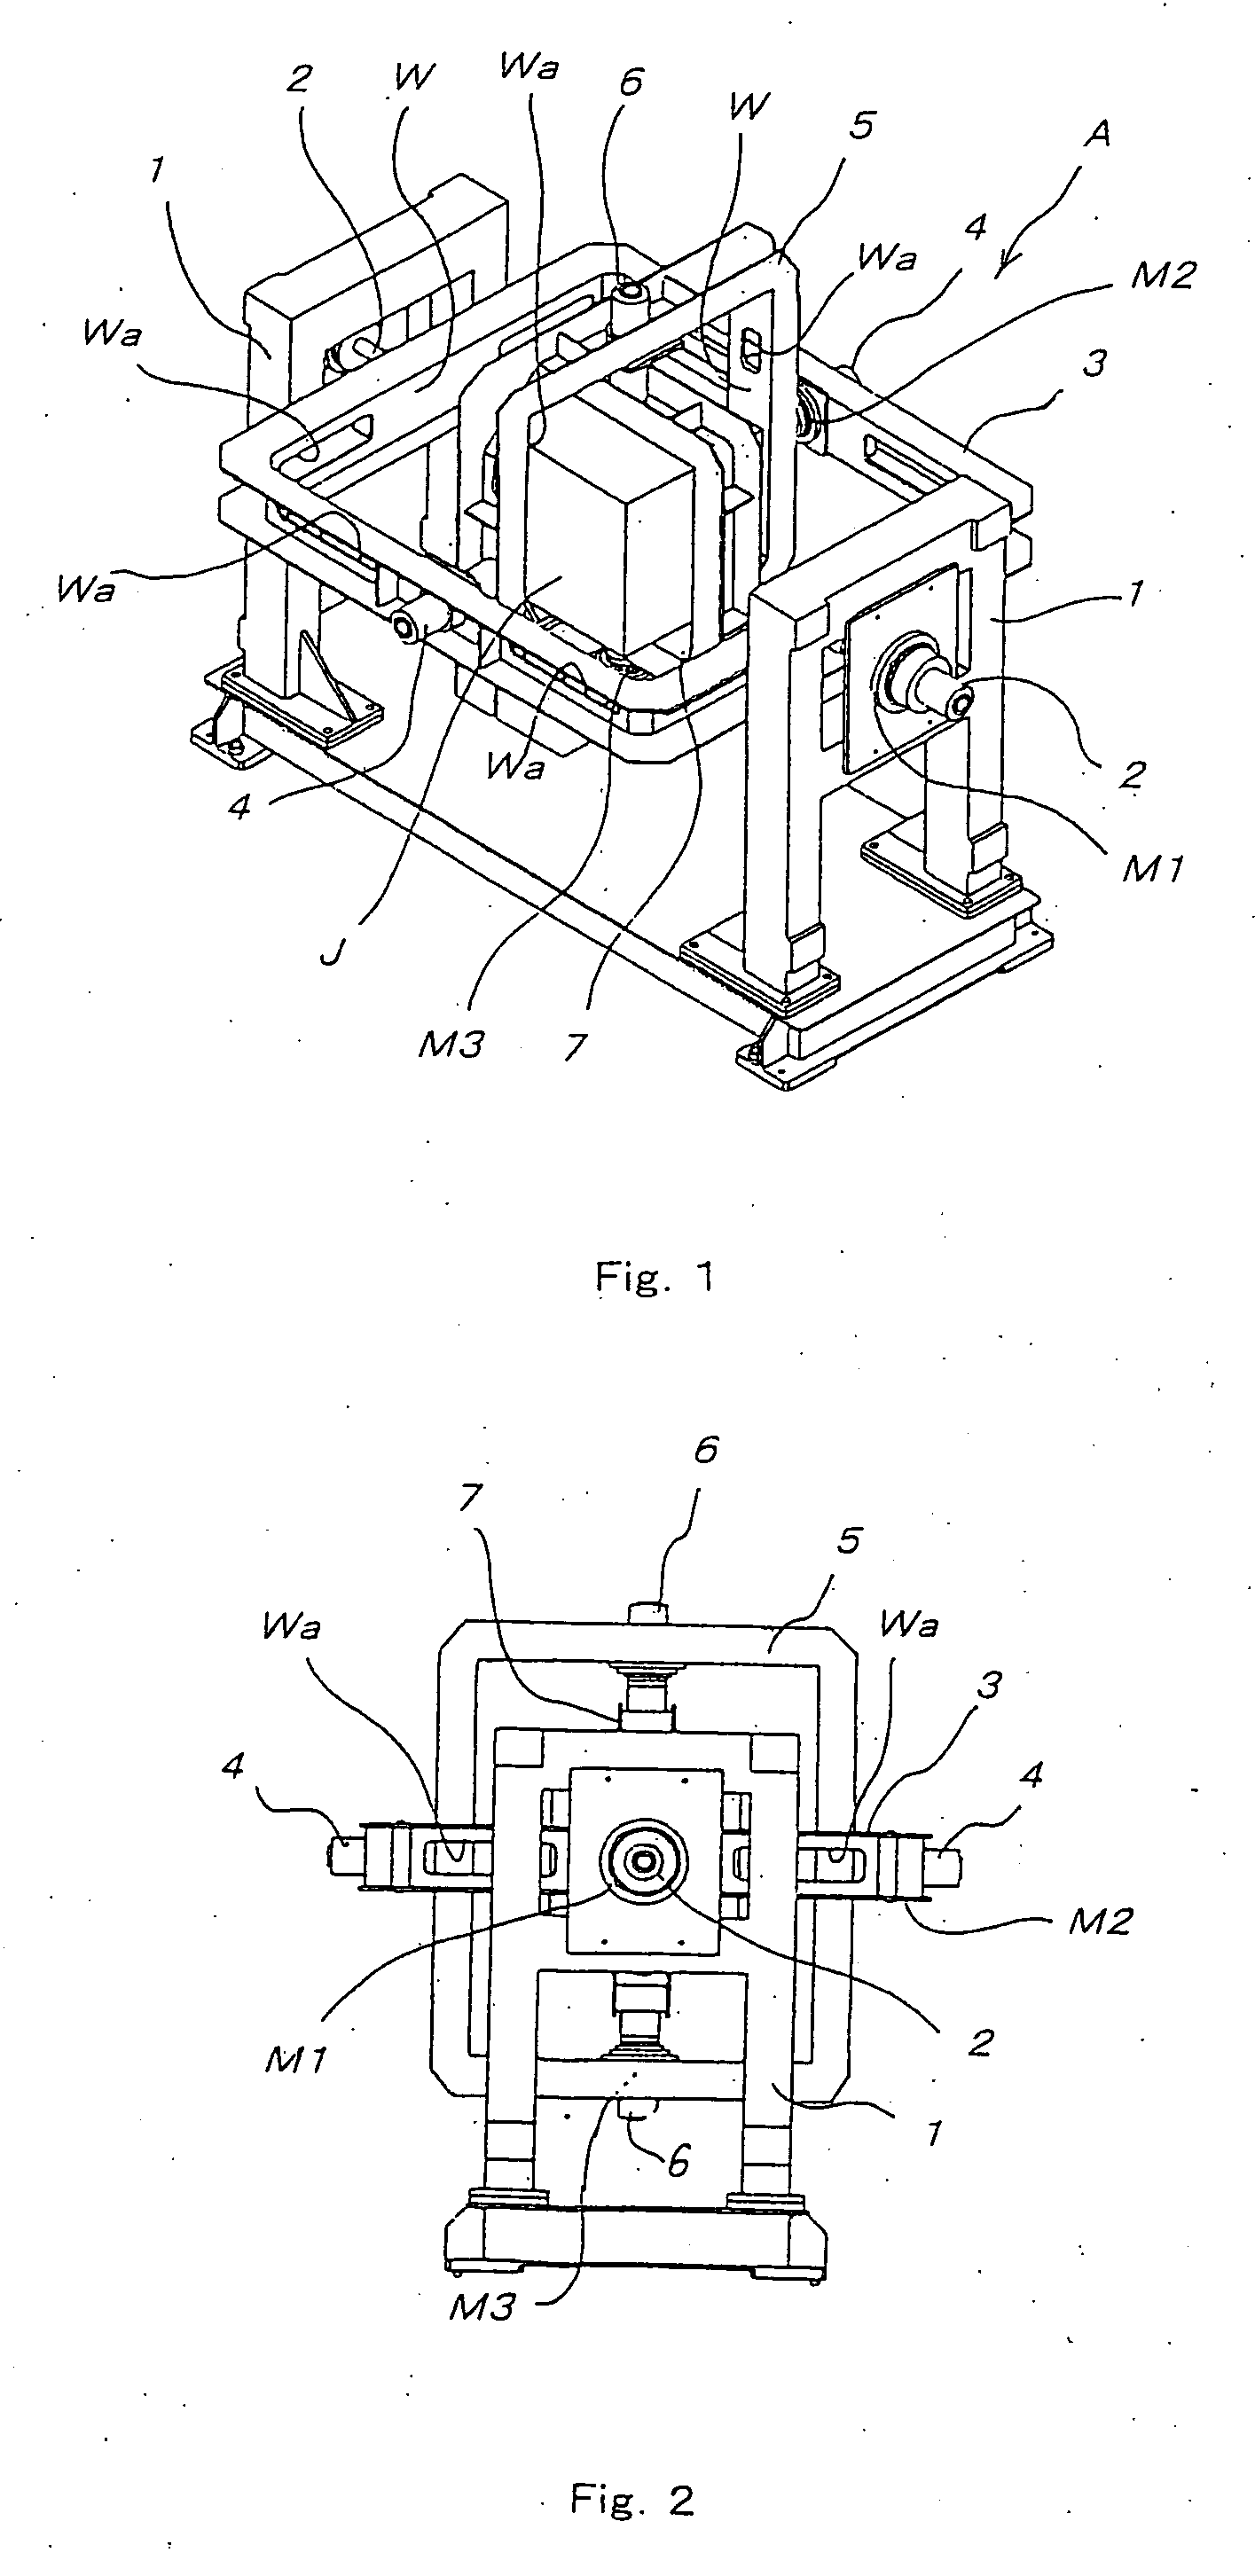 Three-axis motion table